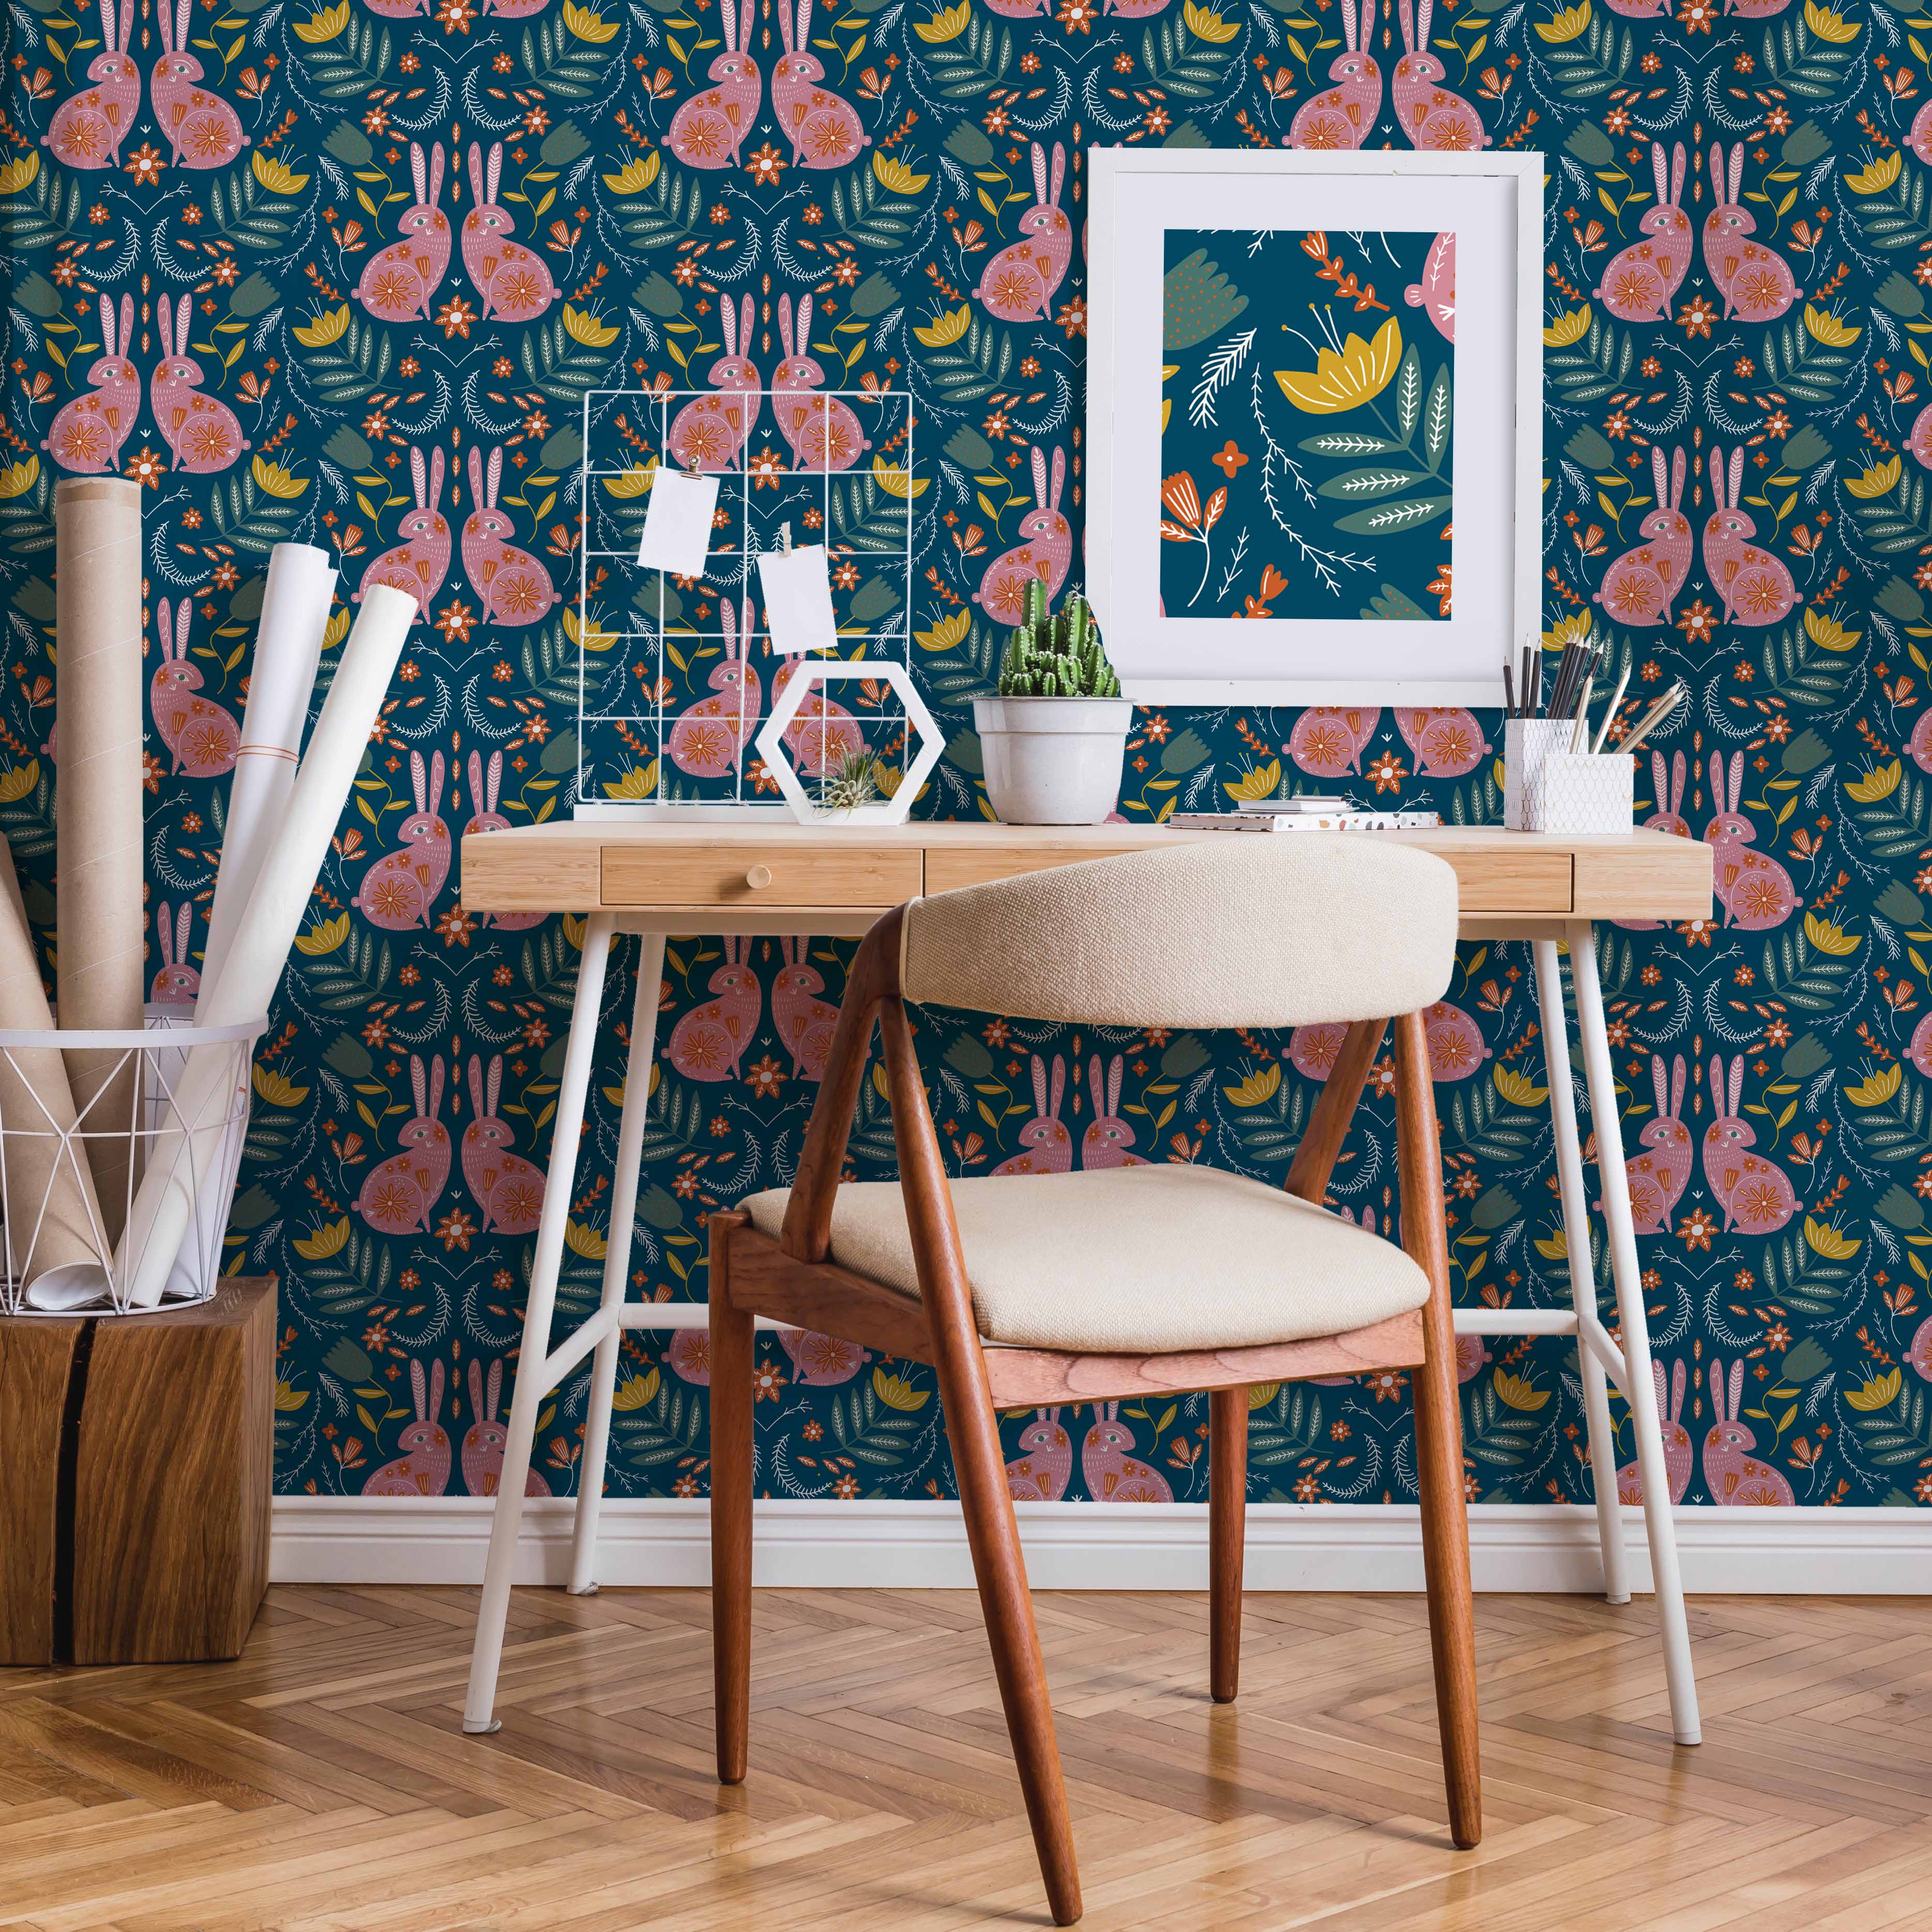 Bunny Tales Wallpaper in Teal and Cherry Blossom | Lust Home